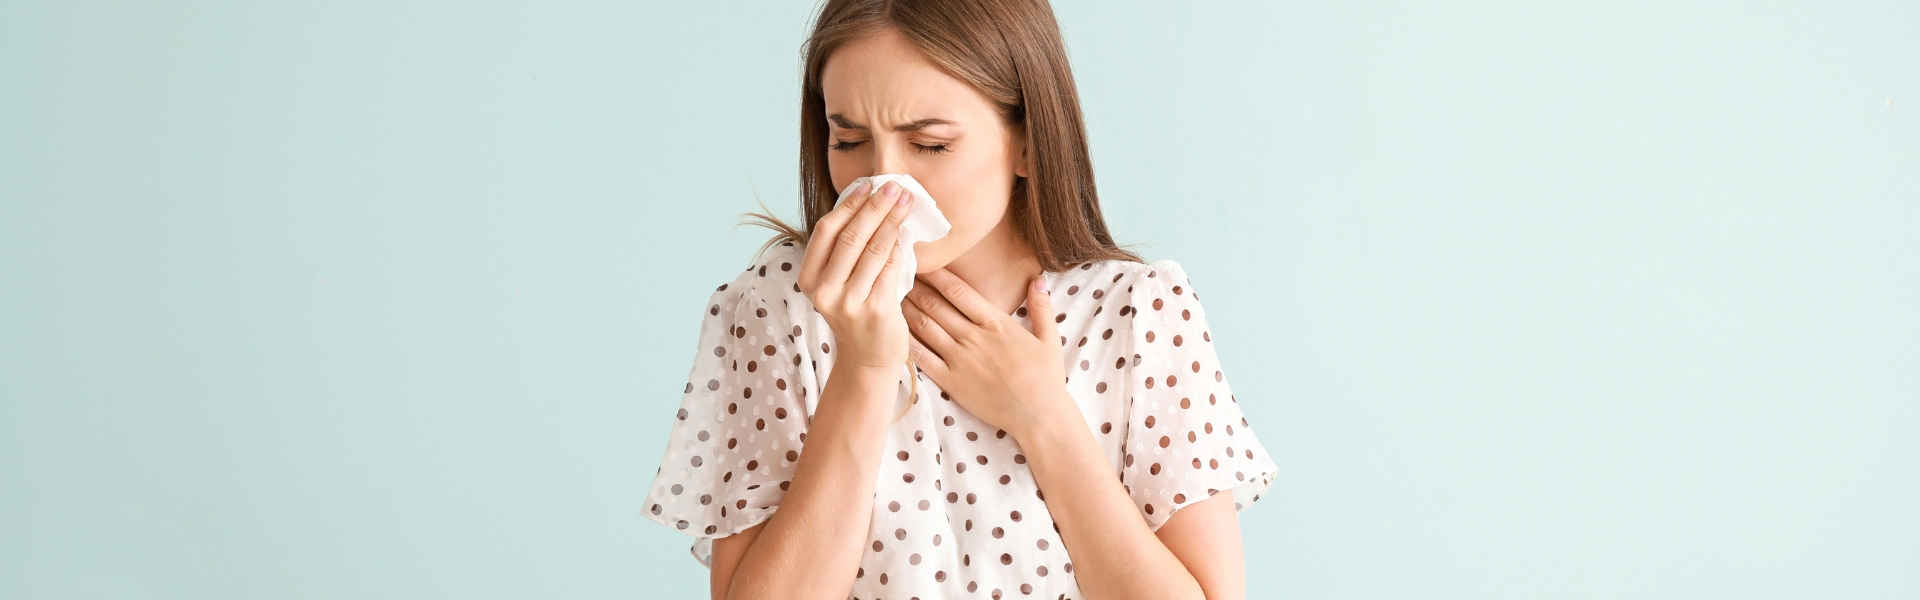 Respiratory Allergy Treatment in homeopathy